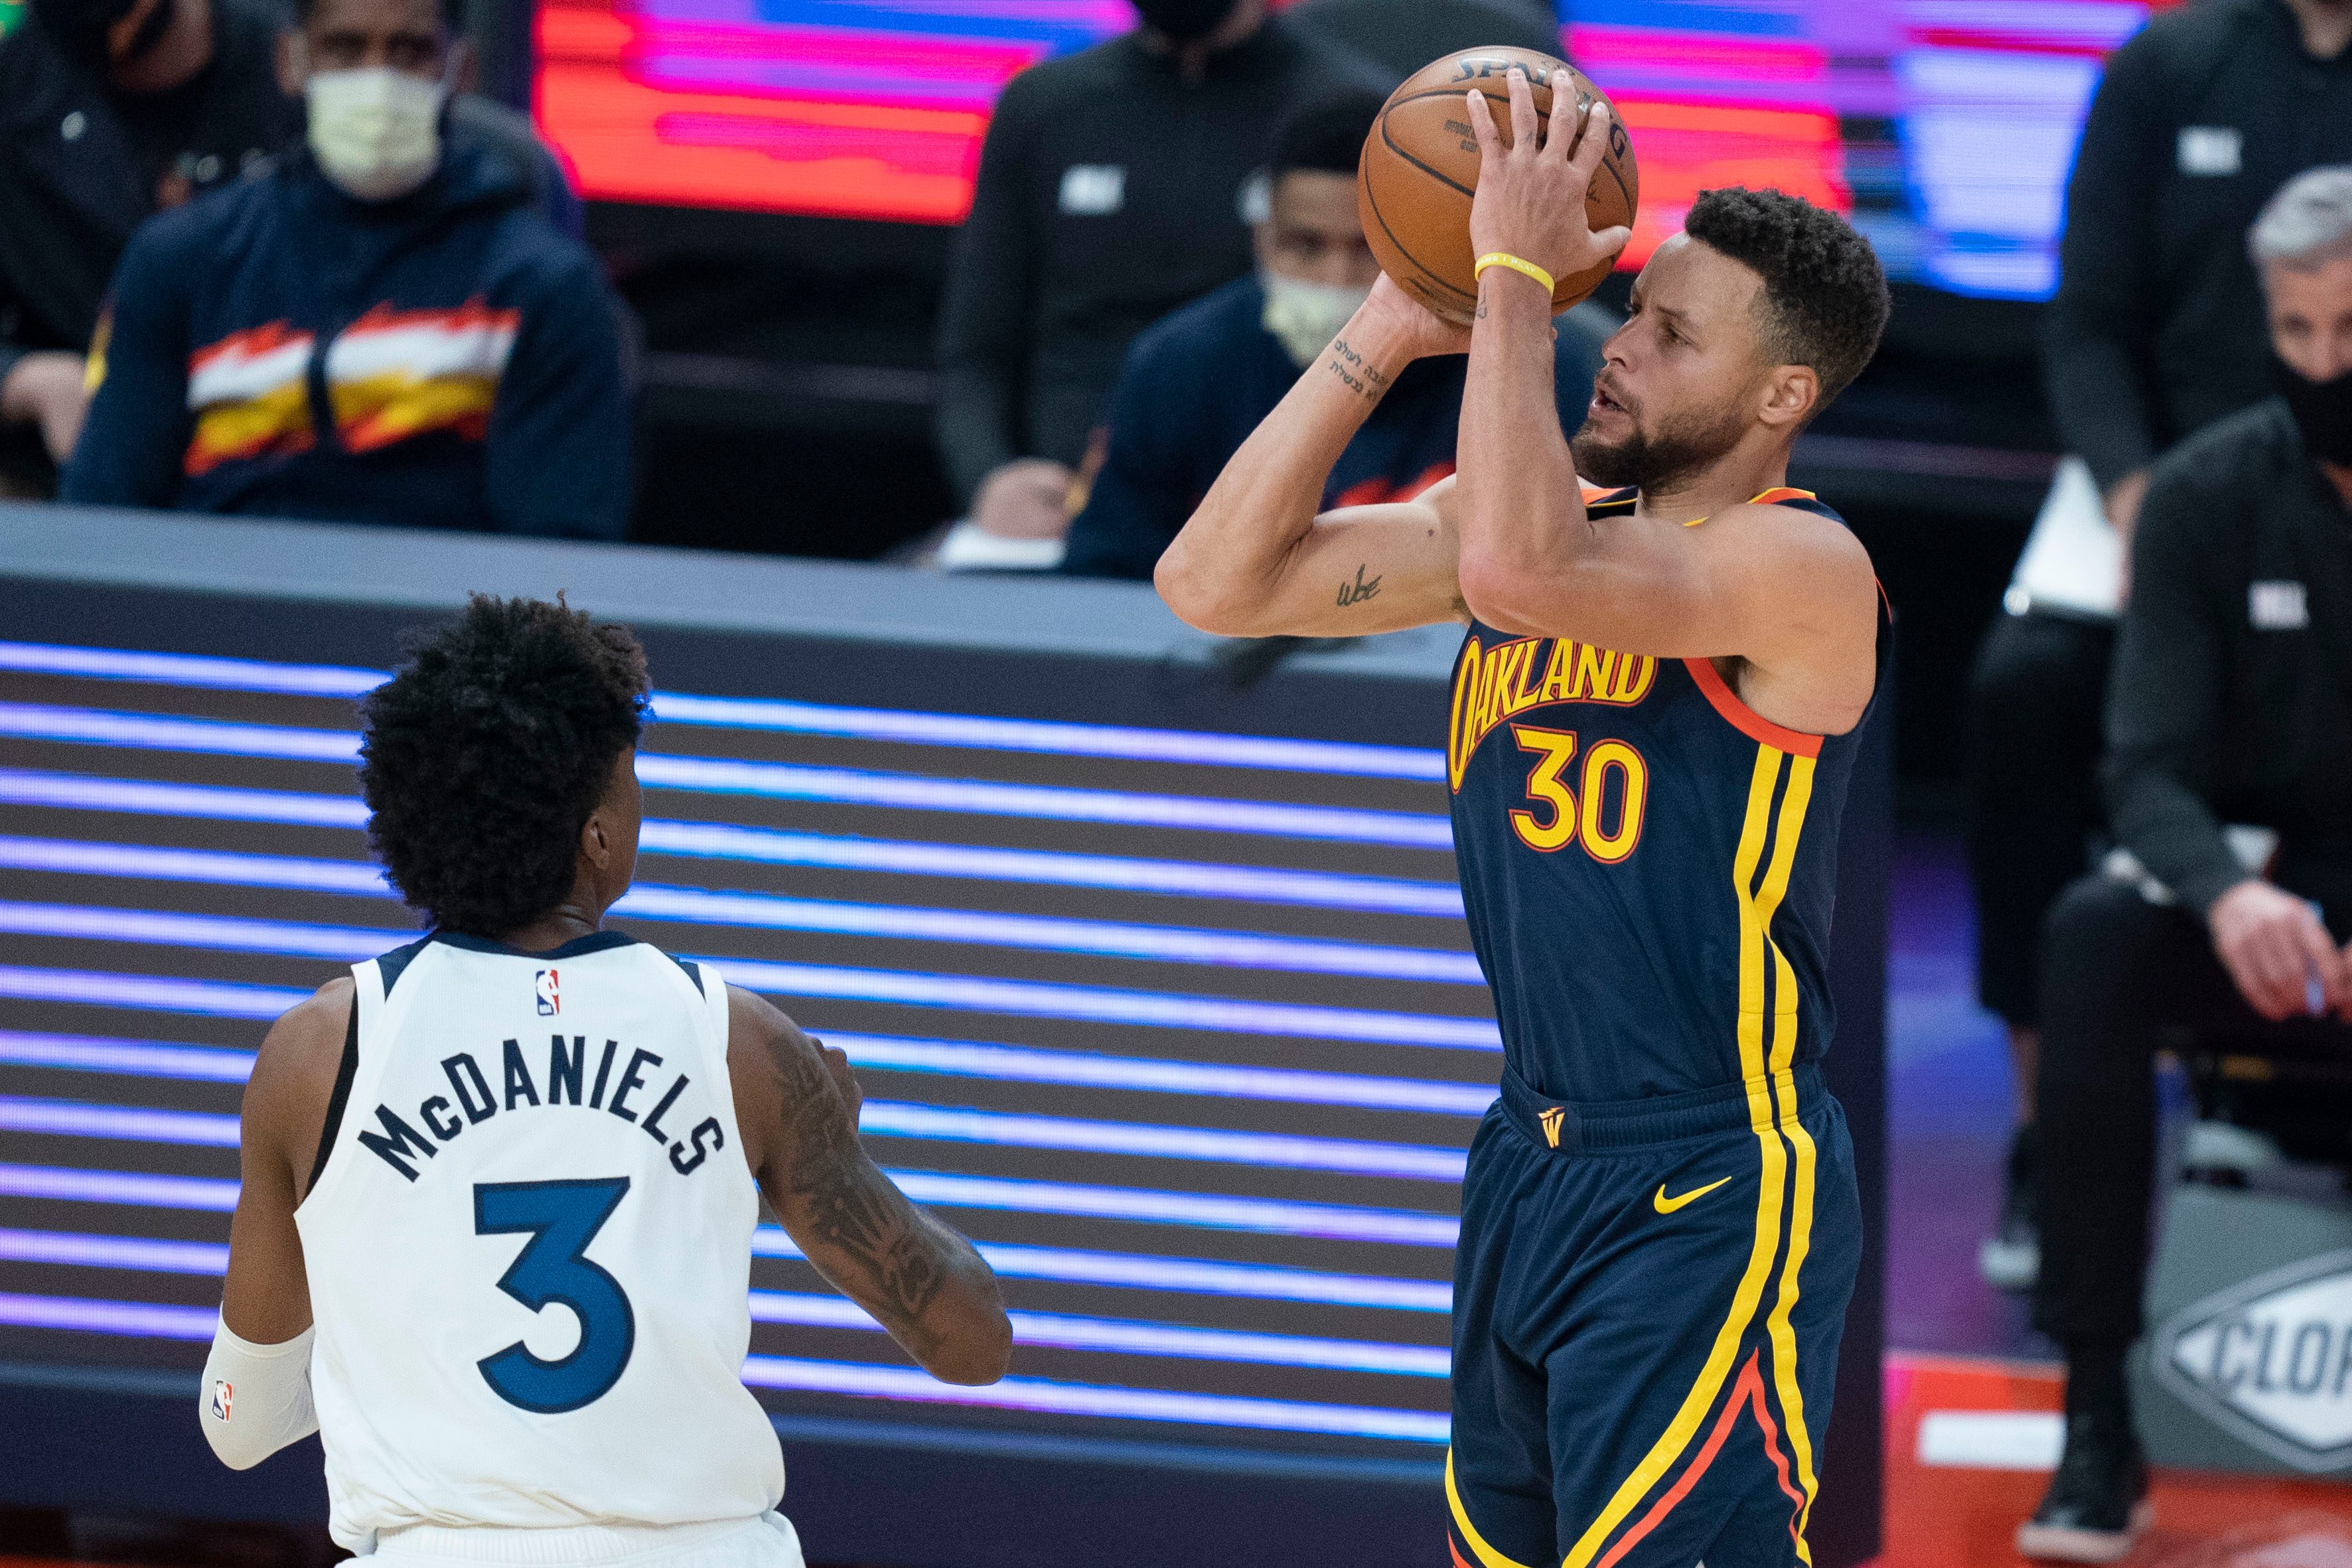 Steph Curry drops 36 in Wiggins’ reunion with Minnesota